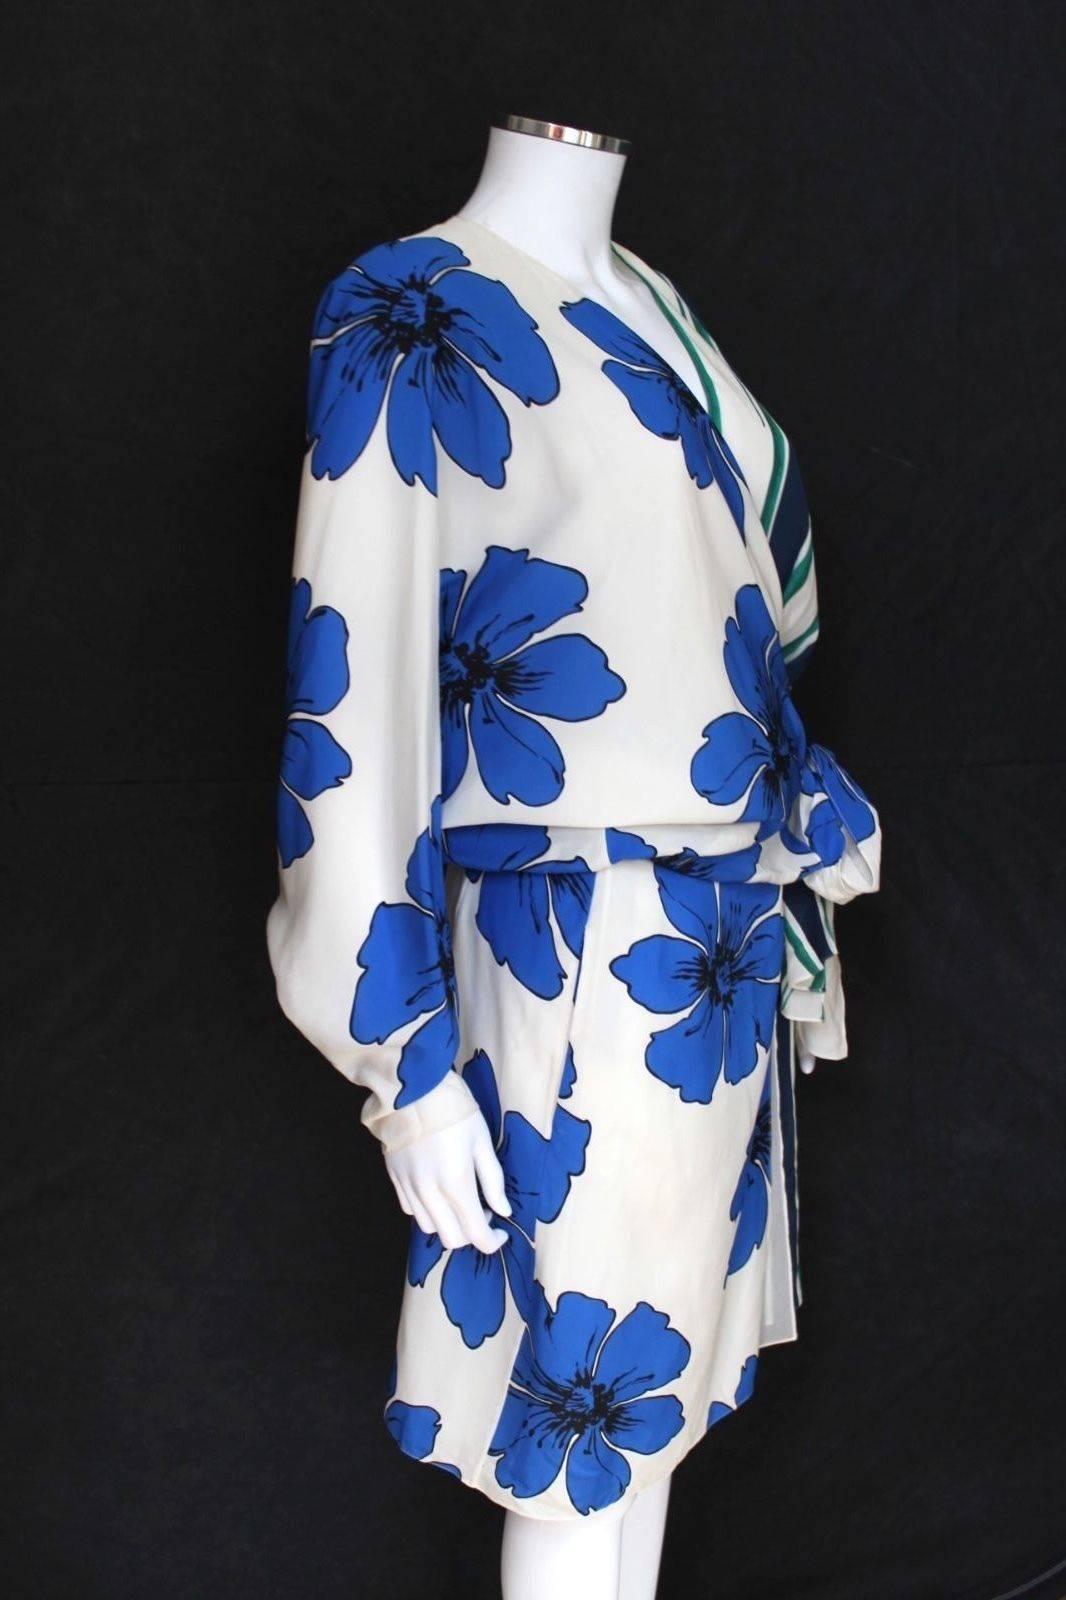 New Chloe Resort 2015 White Striped Floral Dress F 42 uk 12-14  In Excellent Condition For Sale In London, GB